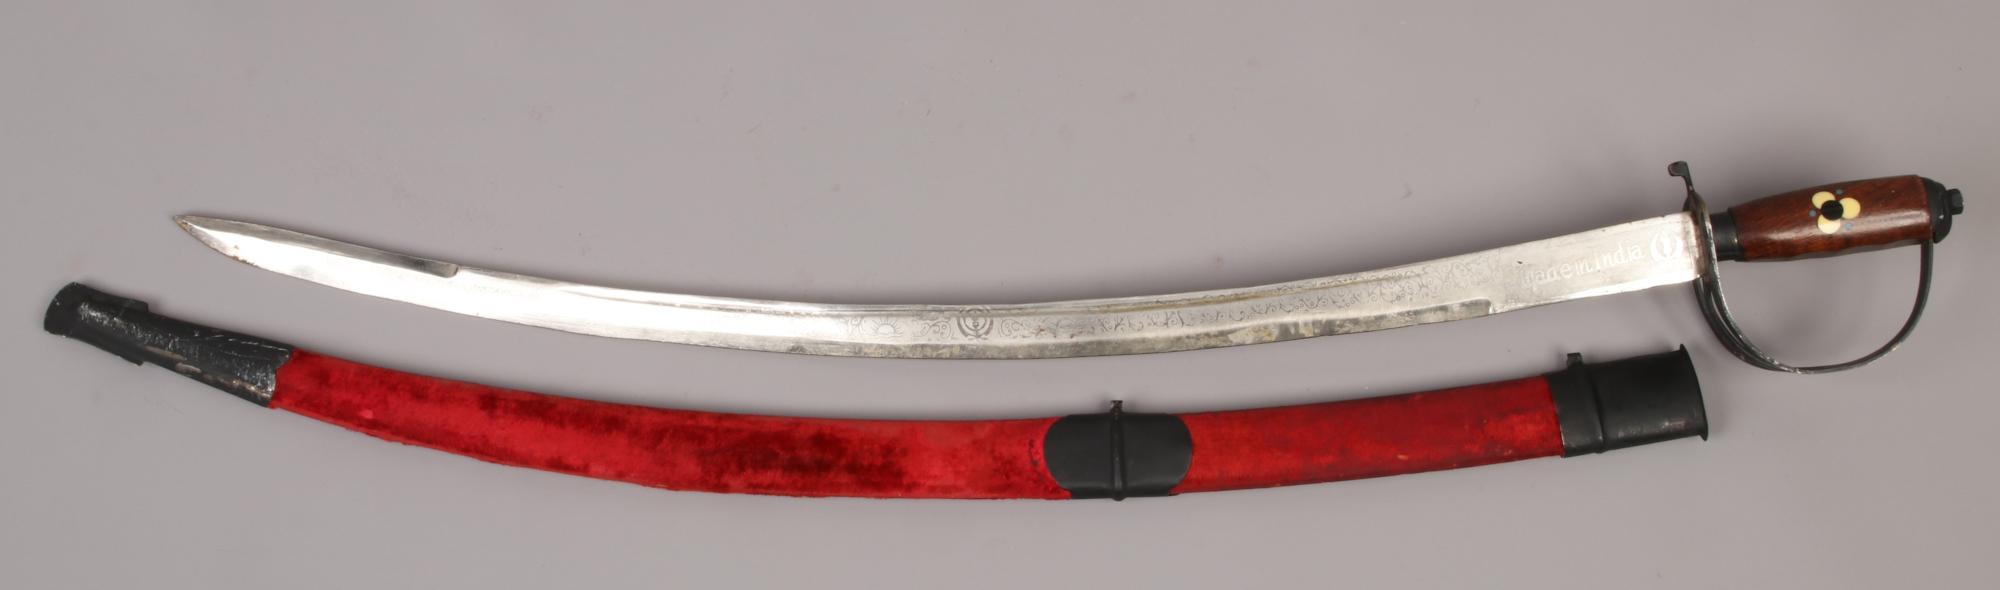 An Indian dress sword with inlaid hardwood grip, etched blade and velvet mounted scabbard.